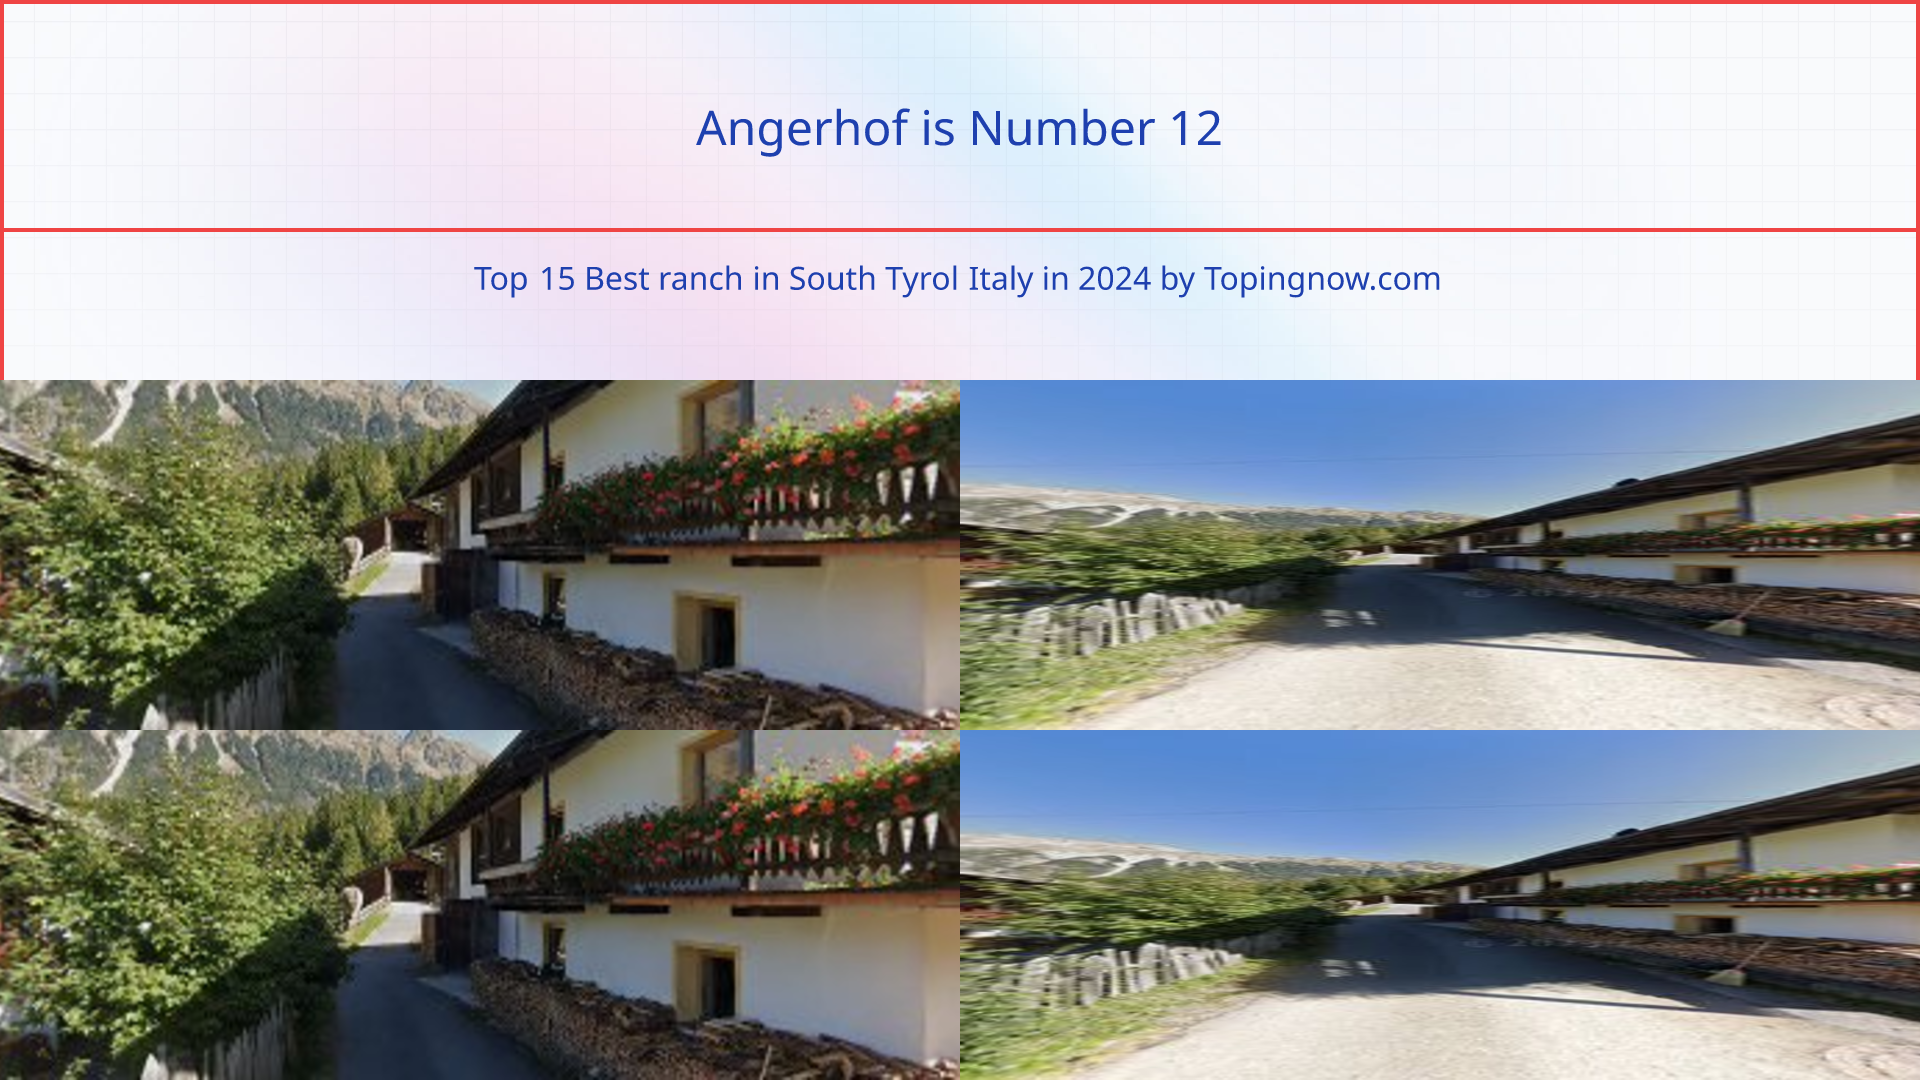 Angerhof: Top 15 Best ranch in South Tyrol Italy in 2024